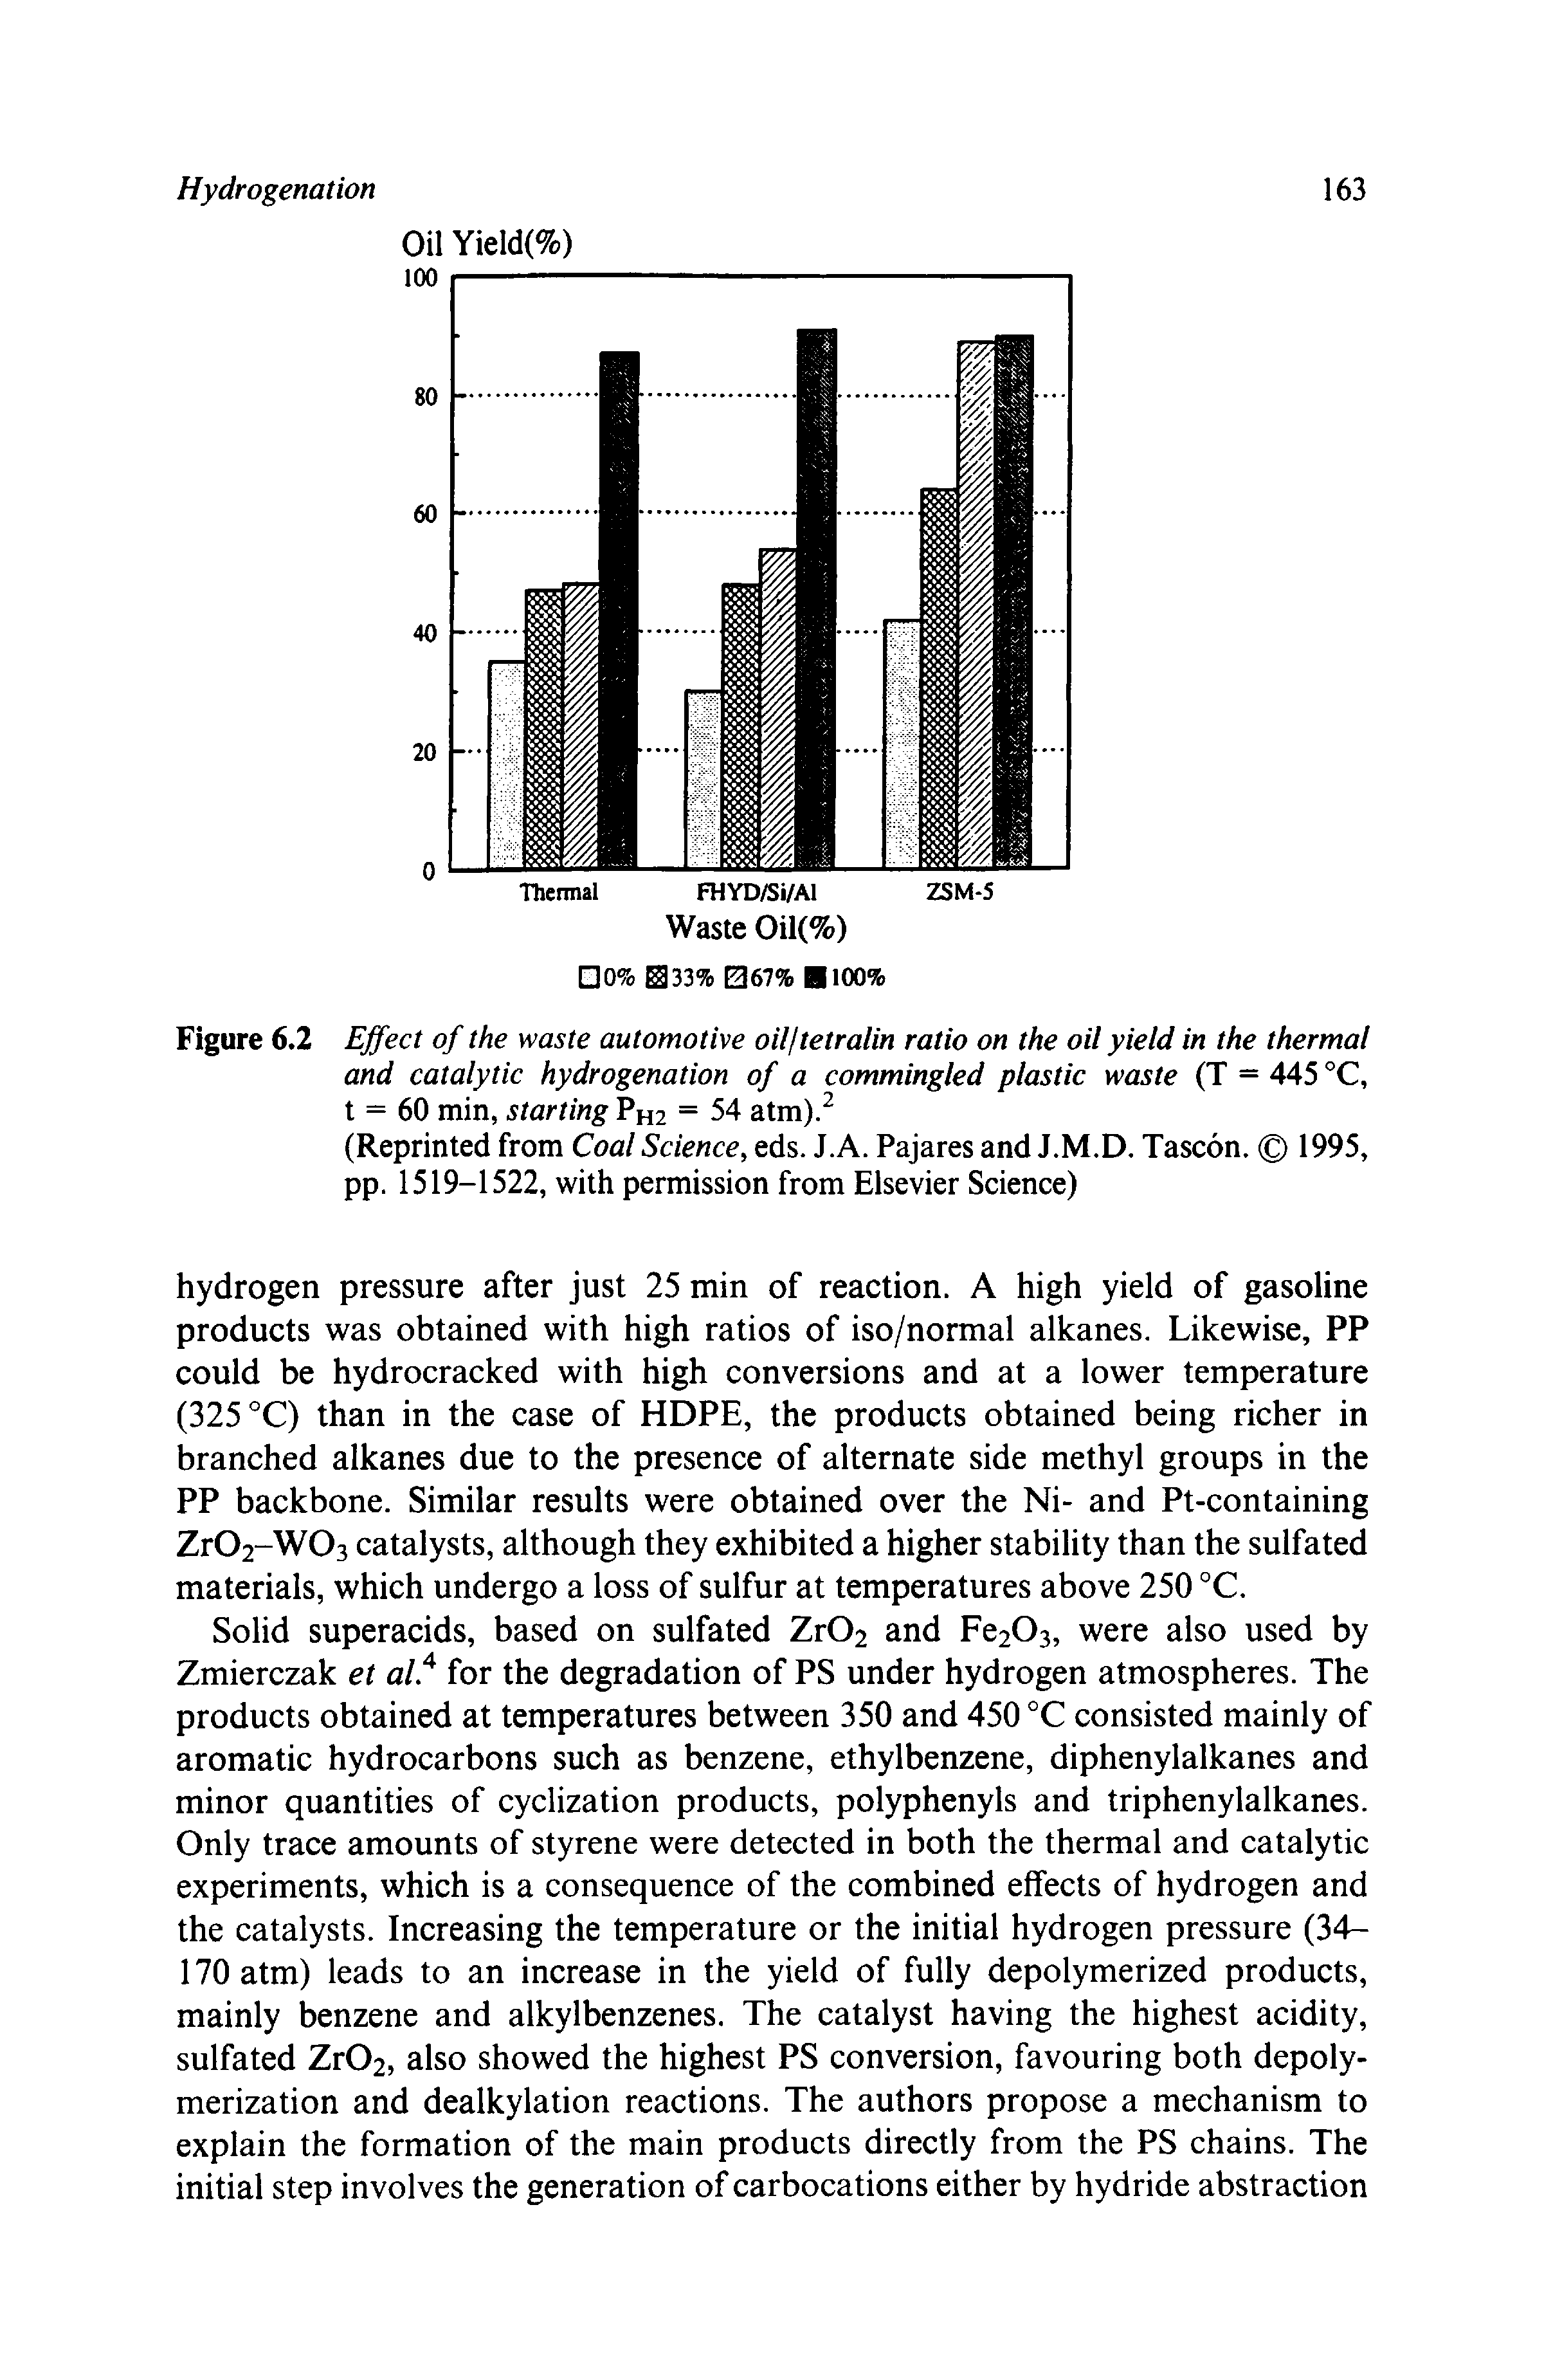 Figure 6.2 Effect of the waste automotive oilftetralin ratio on the oil yield in the thermal and catalytic hydrogenation of a commingled plastic waste (T = 445 °C, t = 60 min, starting PH2 = 54 atm).2...